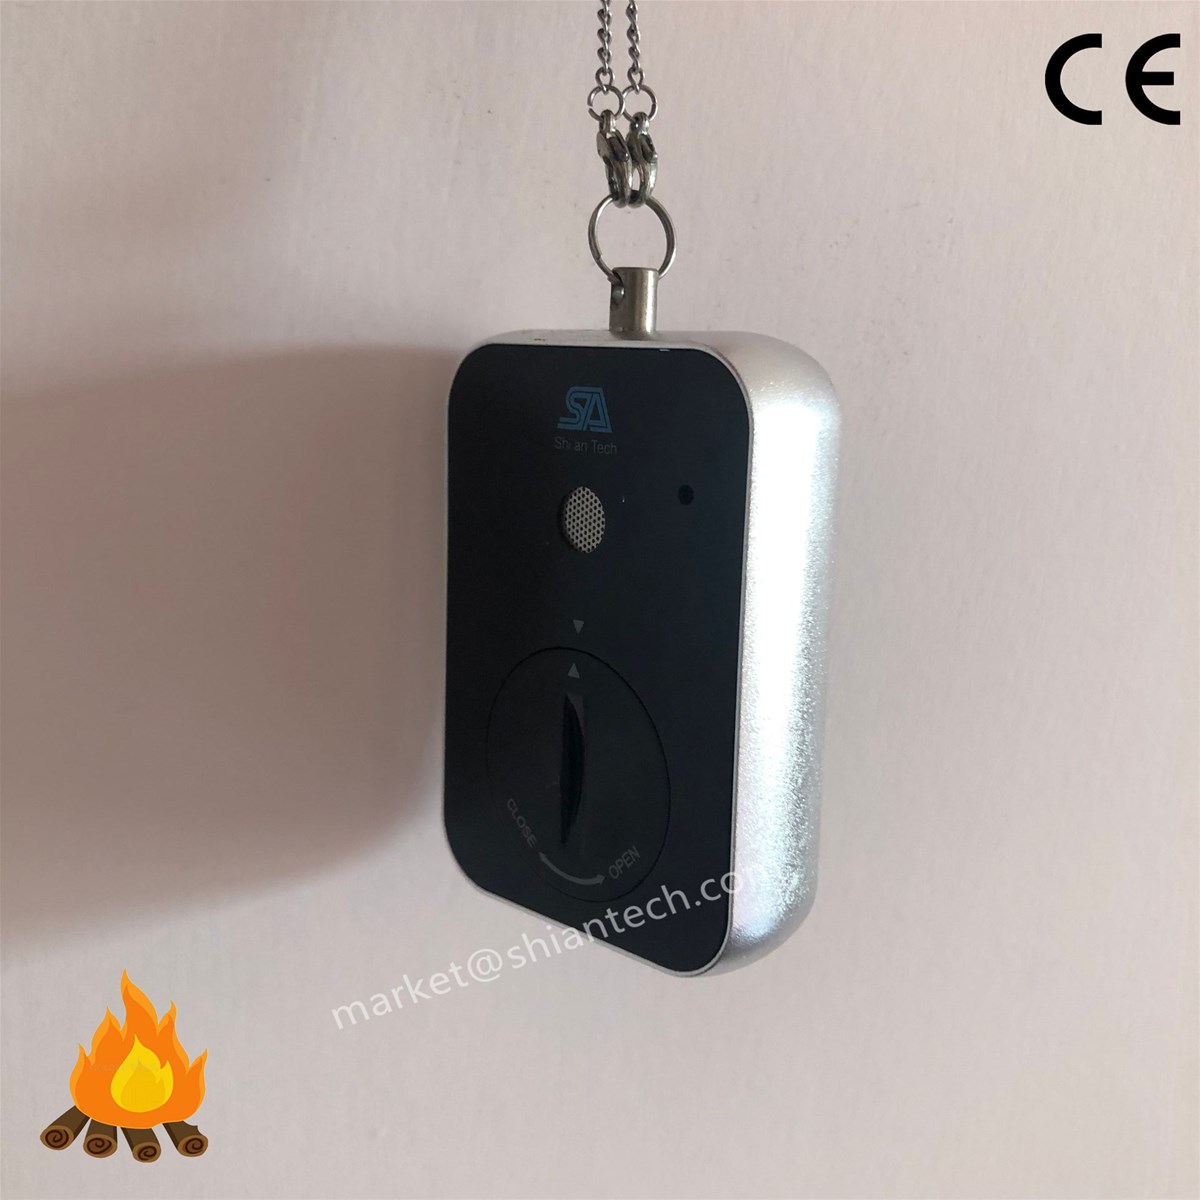 Handheld safety device Carbon monoxide monitor for drivers and camplers in daily life